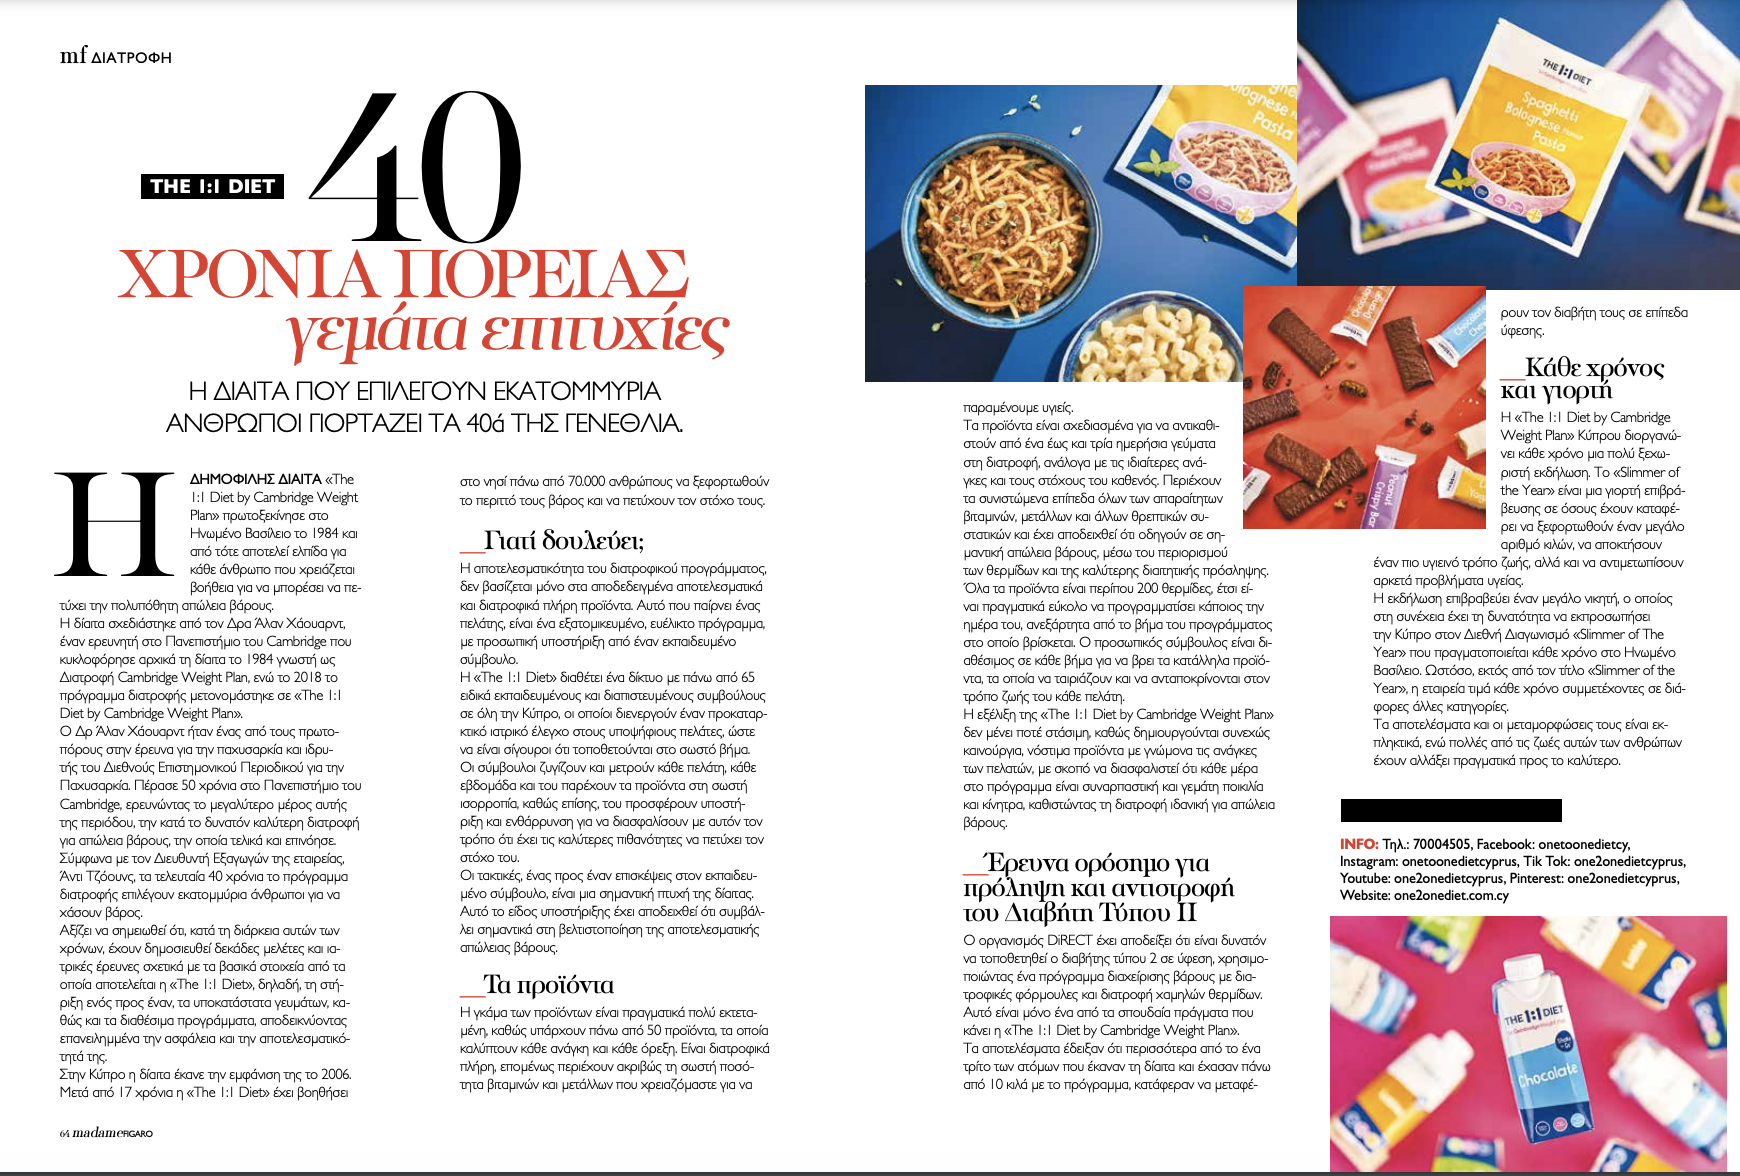 The 1:1 Diet Cyprus / Publicity for 40 Years Anniversary